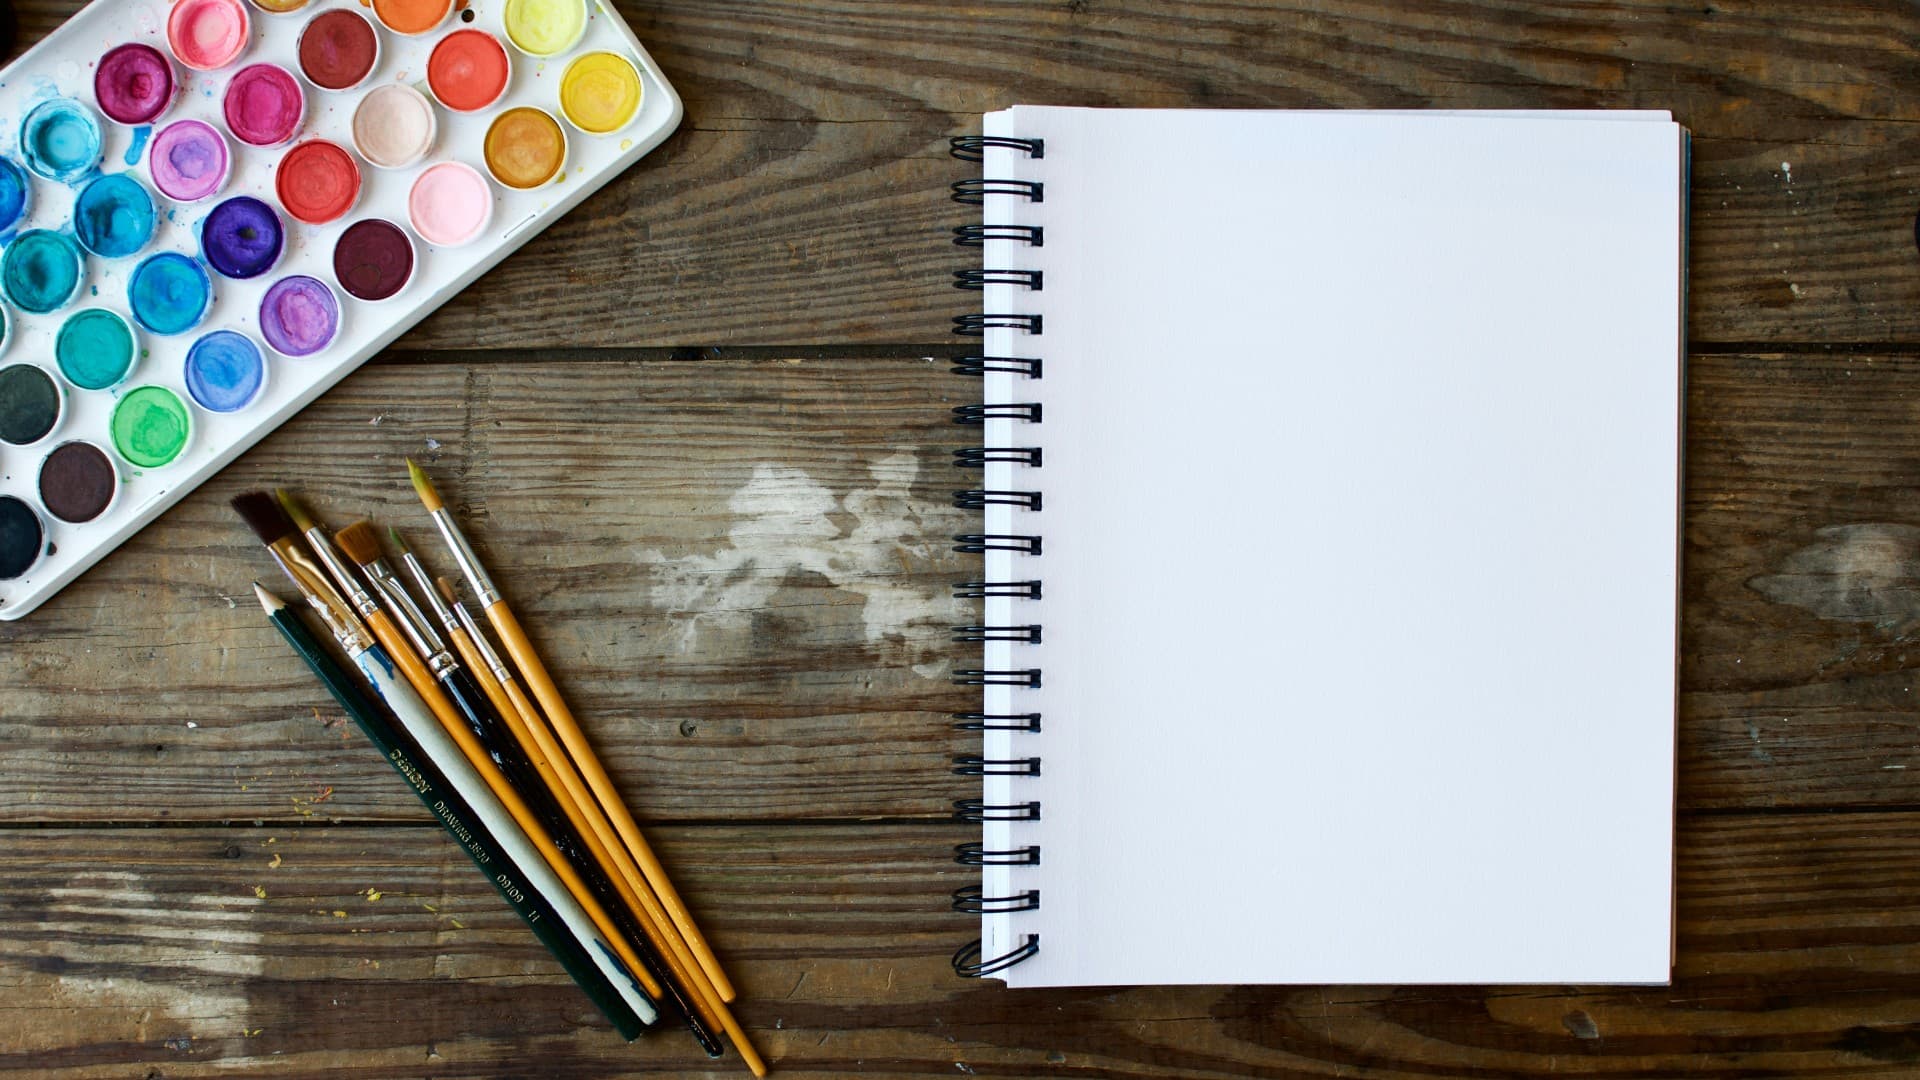 Watercolour paints, paintbrushes and a notebook are laid on a table. Photo: Unsplash